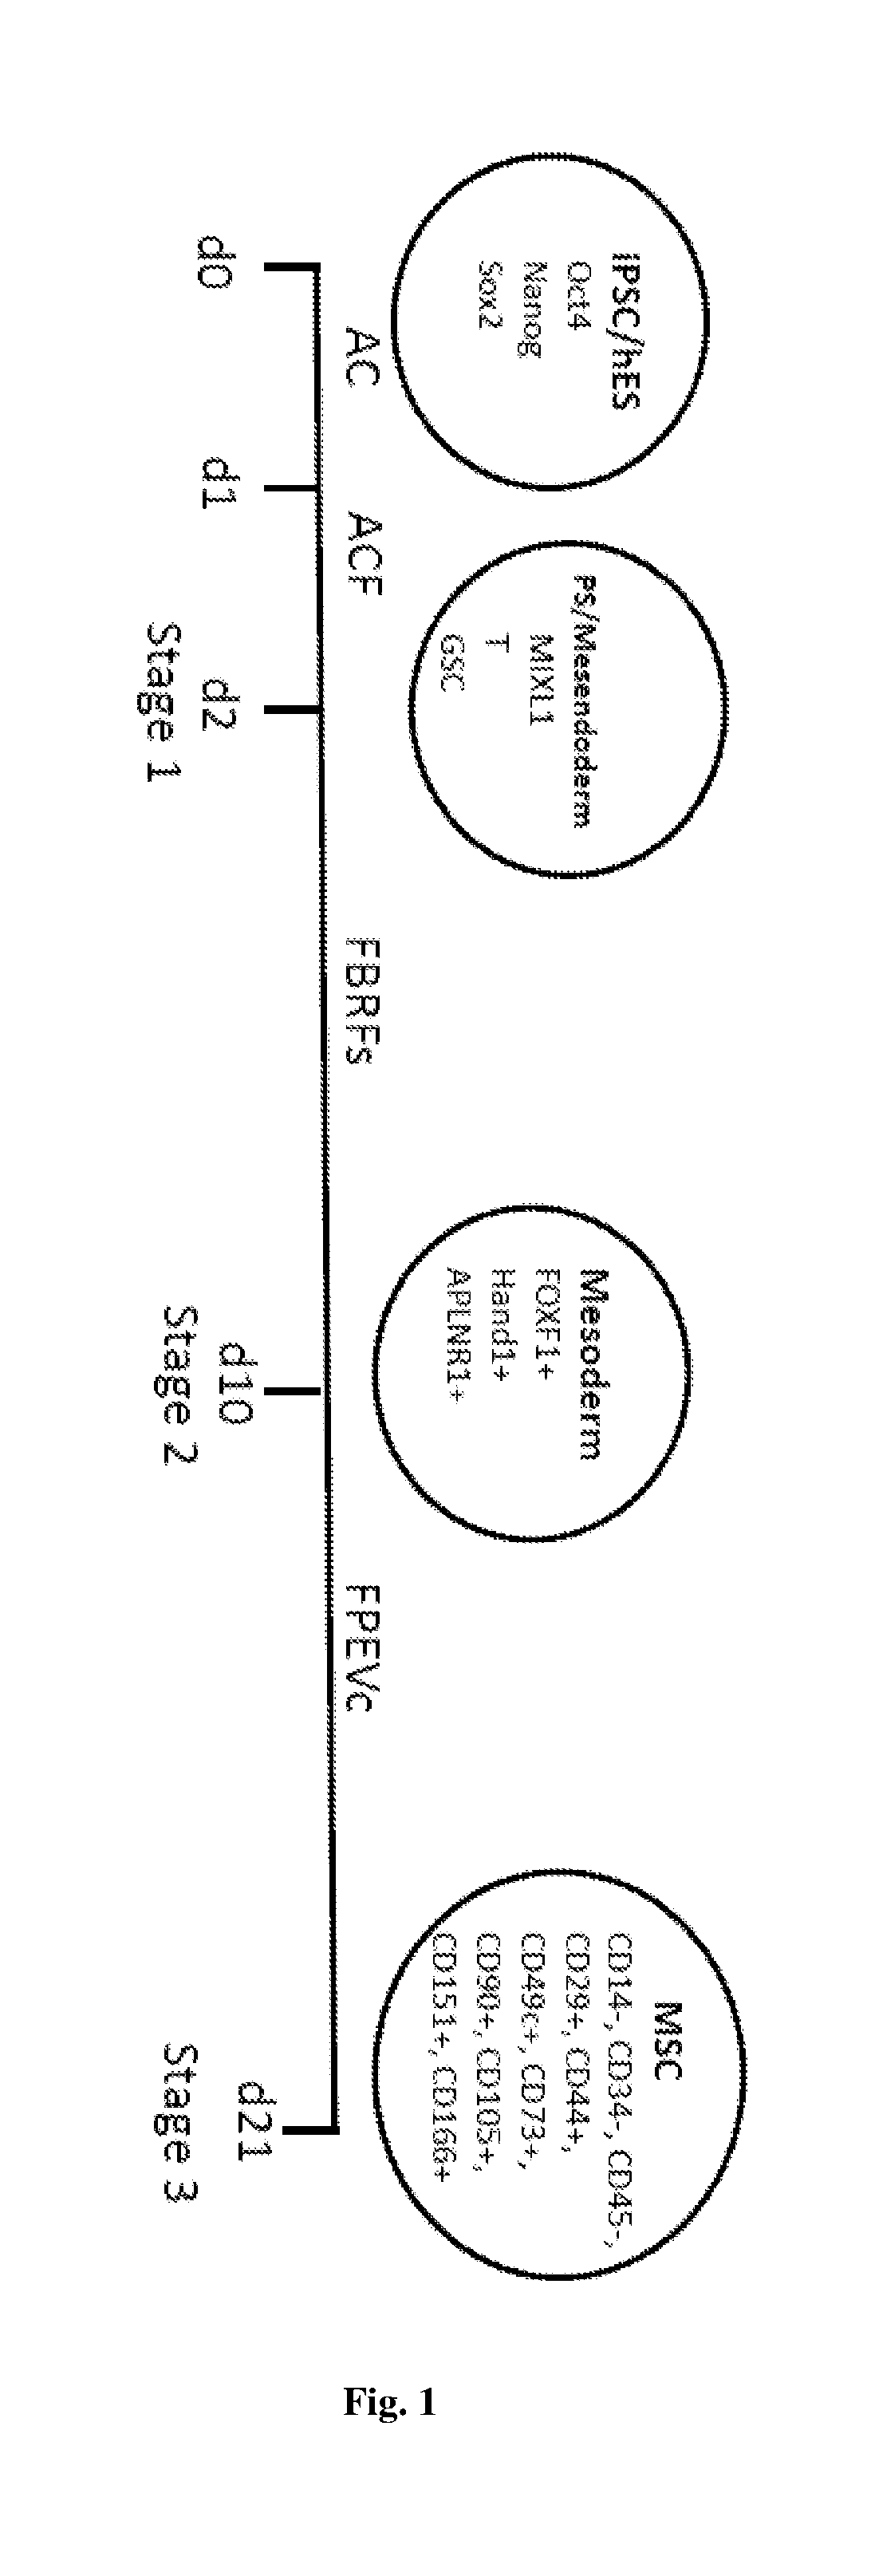 Method of generating mesenchymal stem cells and uses thereof